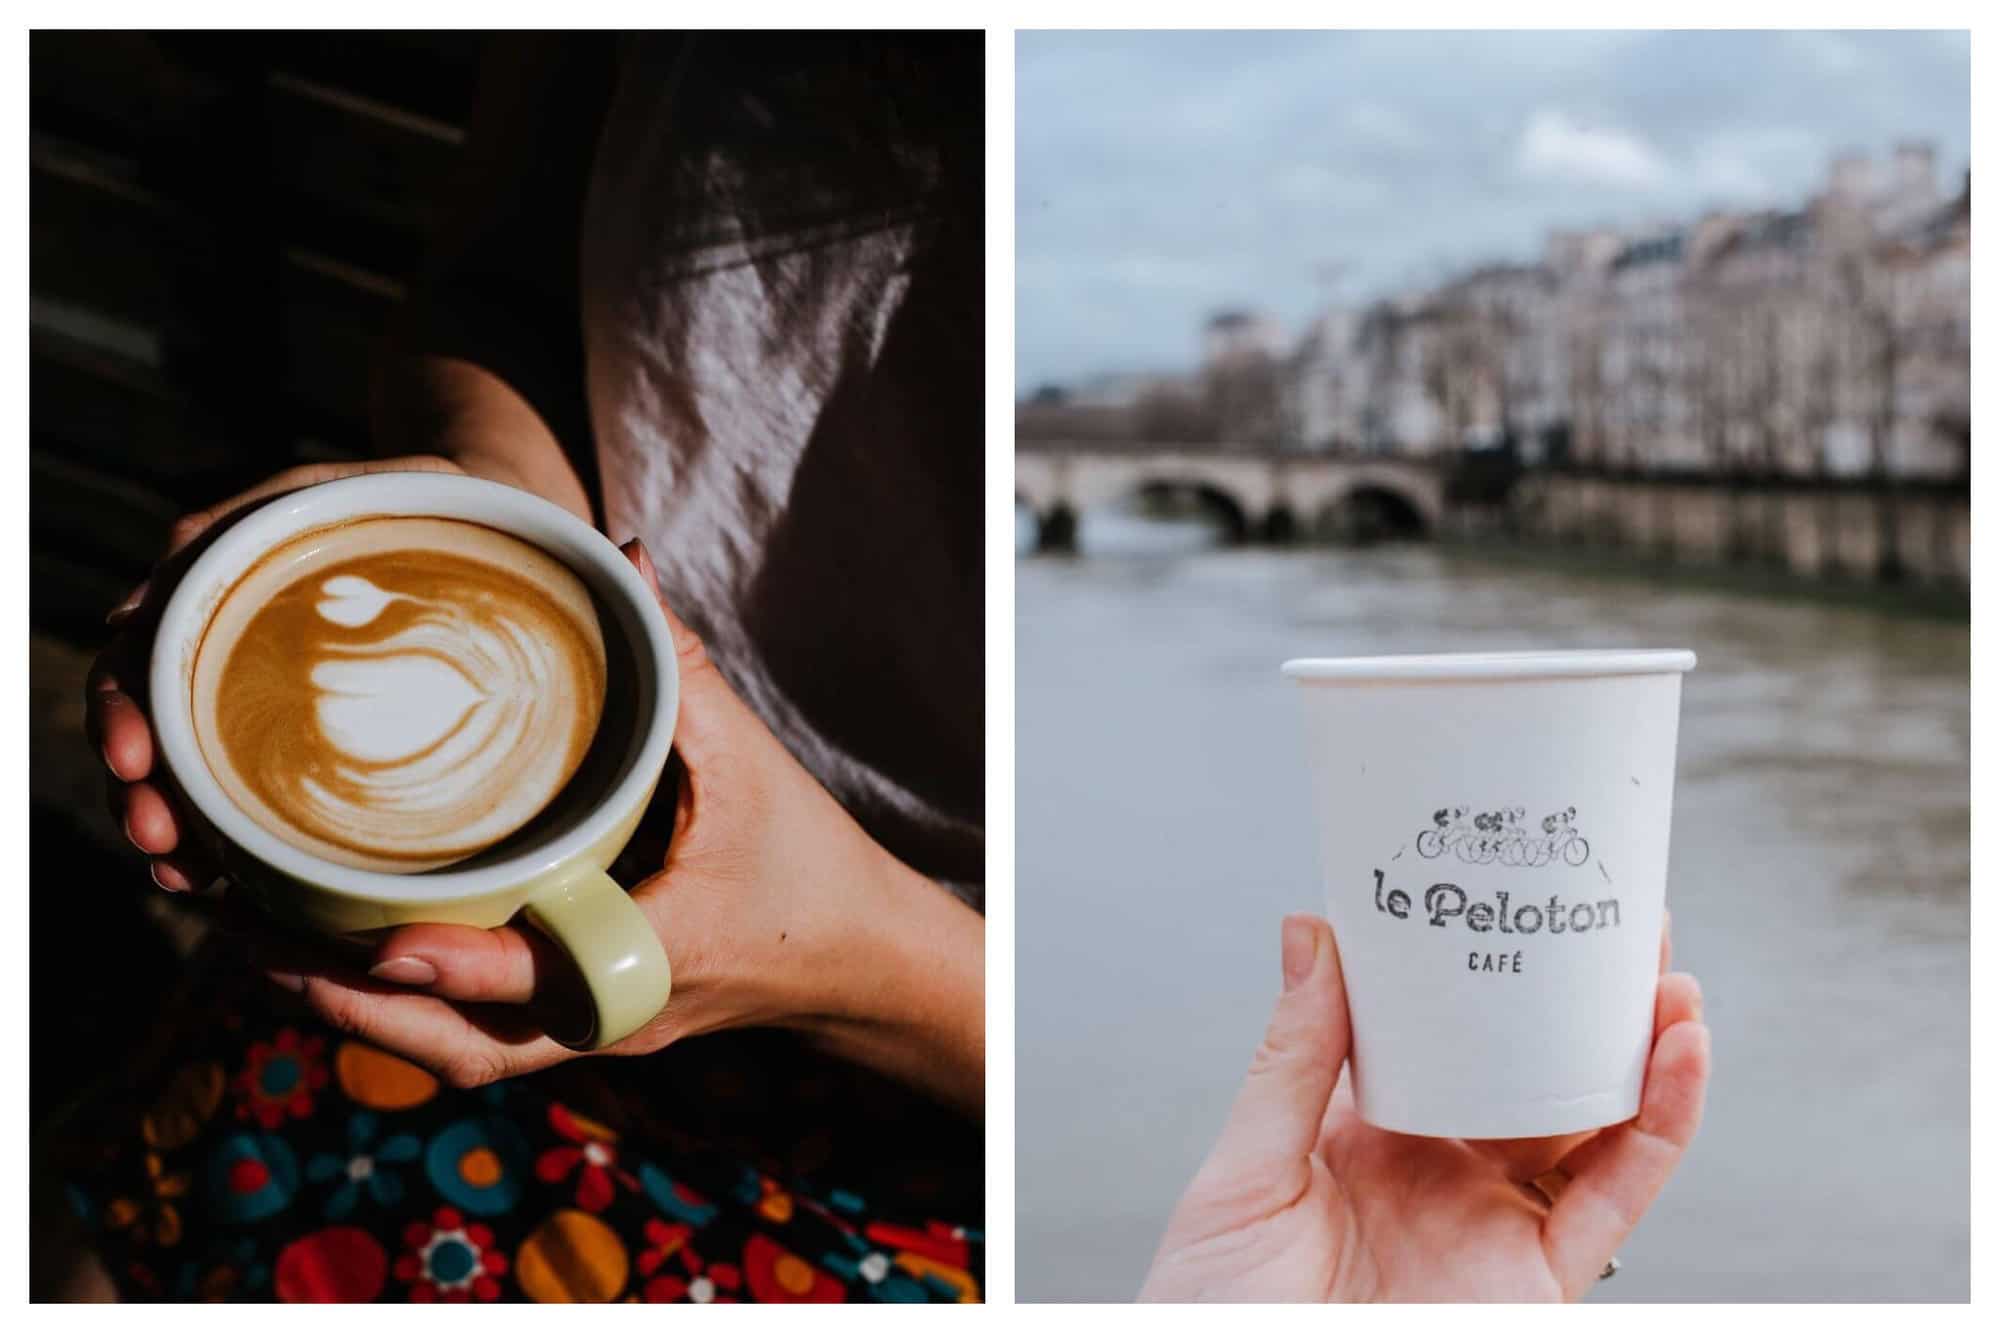 Left: a photo of a woman holding a fresh coffee in a green mug up close where we can only see her hands and her floral skirt. Right: a photo of a coffee cup labeled Le Peloton café, being held on the Seine in Paris.